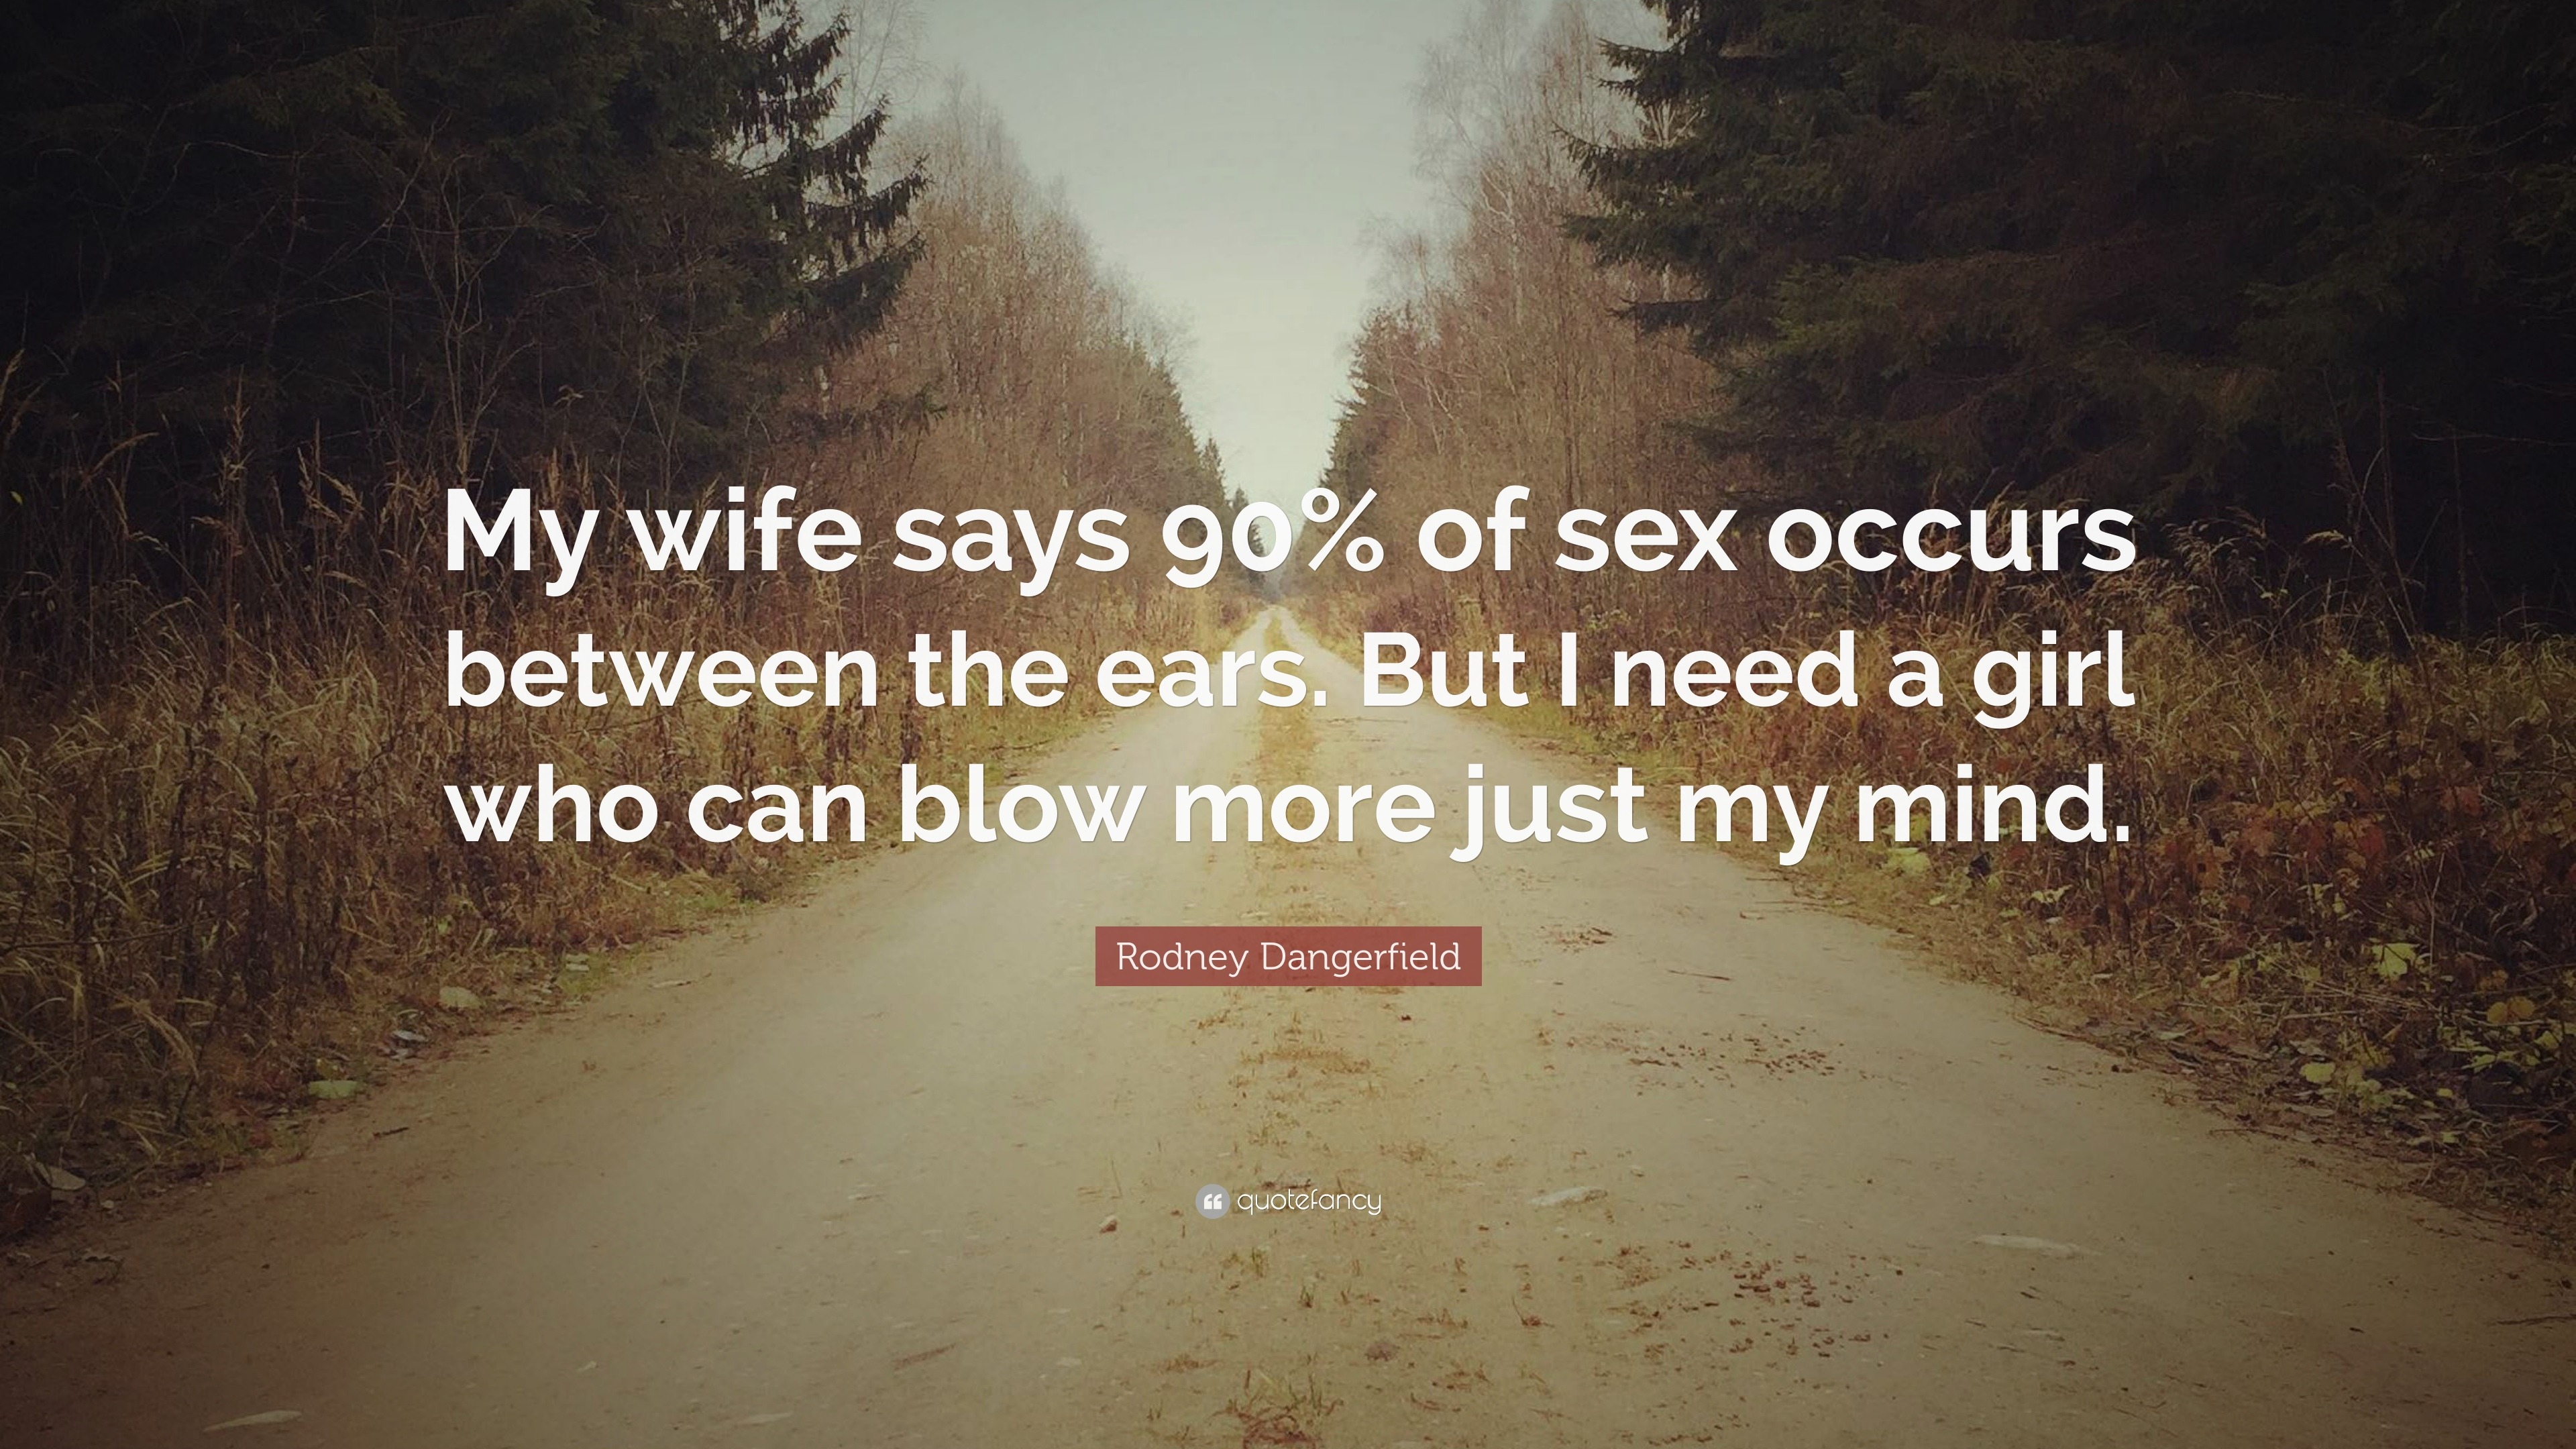 Rodney Dangerfield Quote “My wife says 90% of sex occurs between the ears